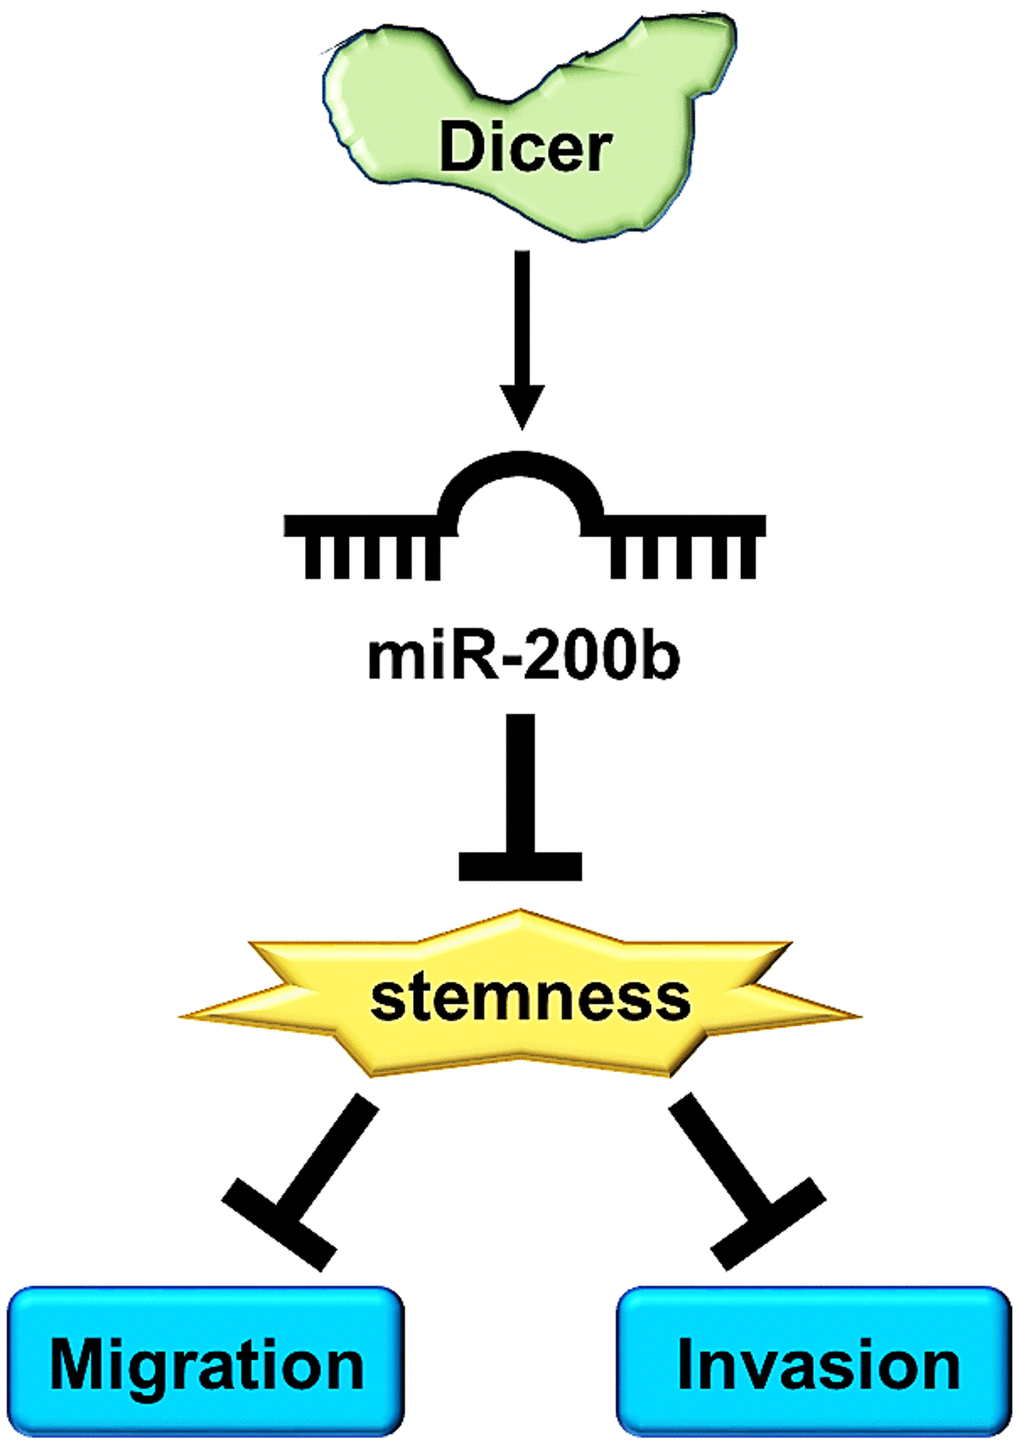 A schematic diagram illustrates that Dicer mediates the cell migration/invasion, and CSCs properties of breast cancer through miR-200b regulation.